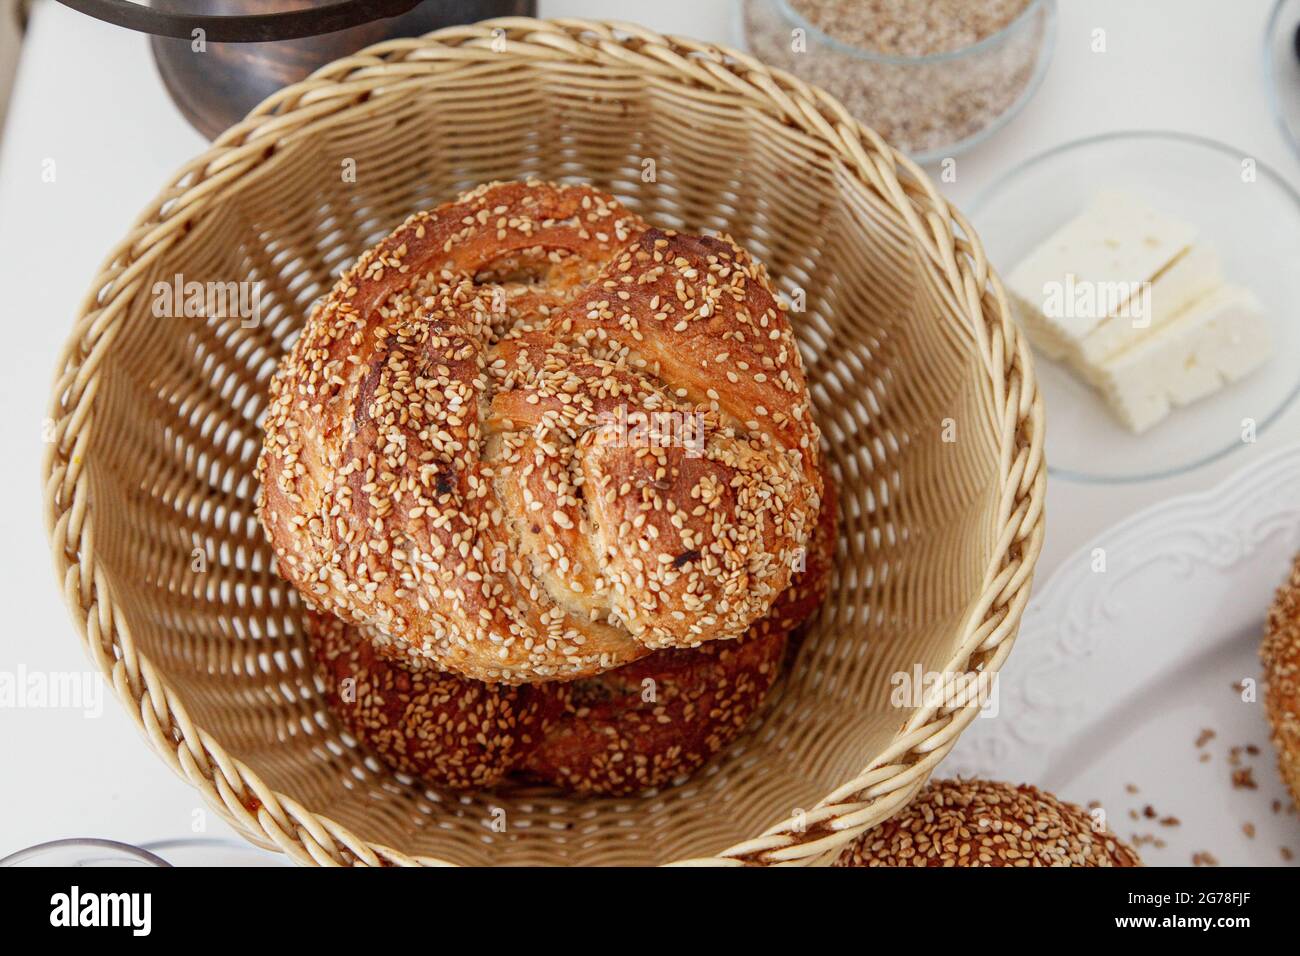 Sesame cookies, cheese, baked goods, bread basket, Ramadan, Turkish, culture, fasting month Stock Photo